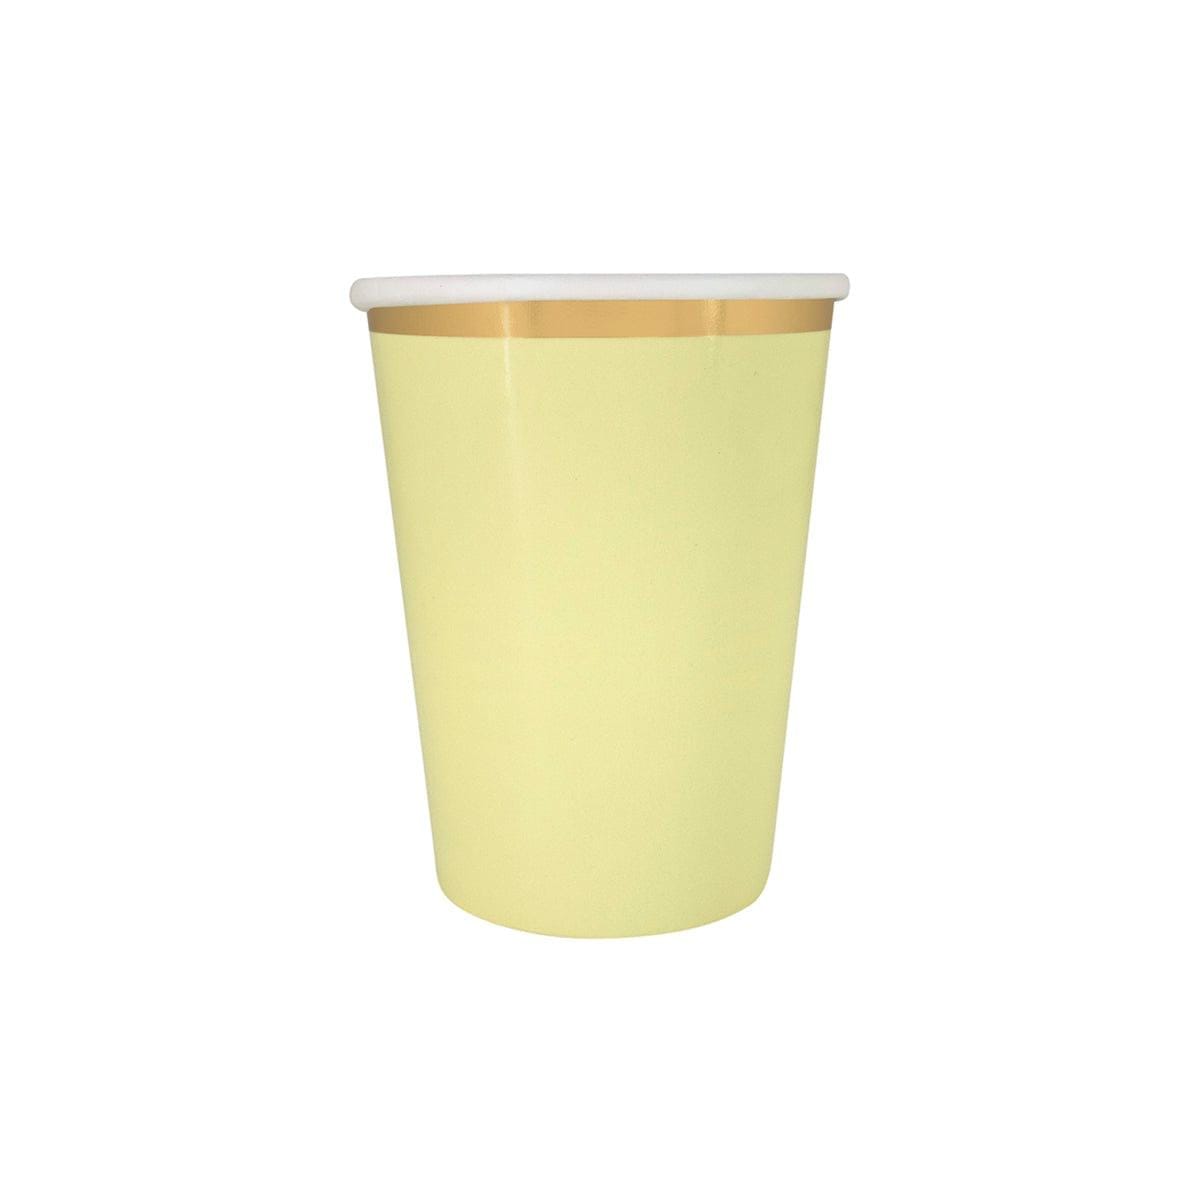 YIWU SANDY PAPER PRODUCTS CO., LTD Everyday Entertaining Cups Yellow, 9 Oz, 8 Count